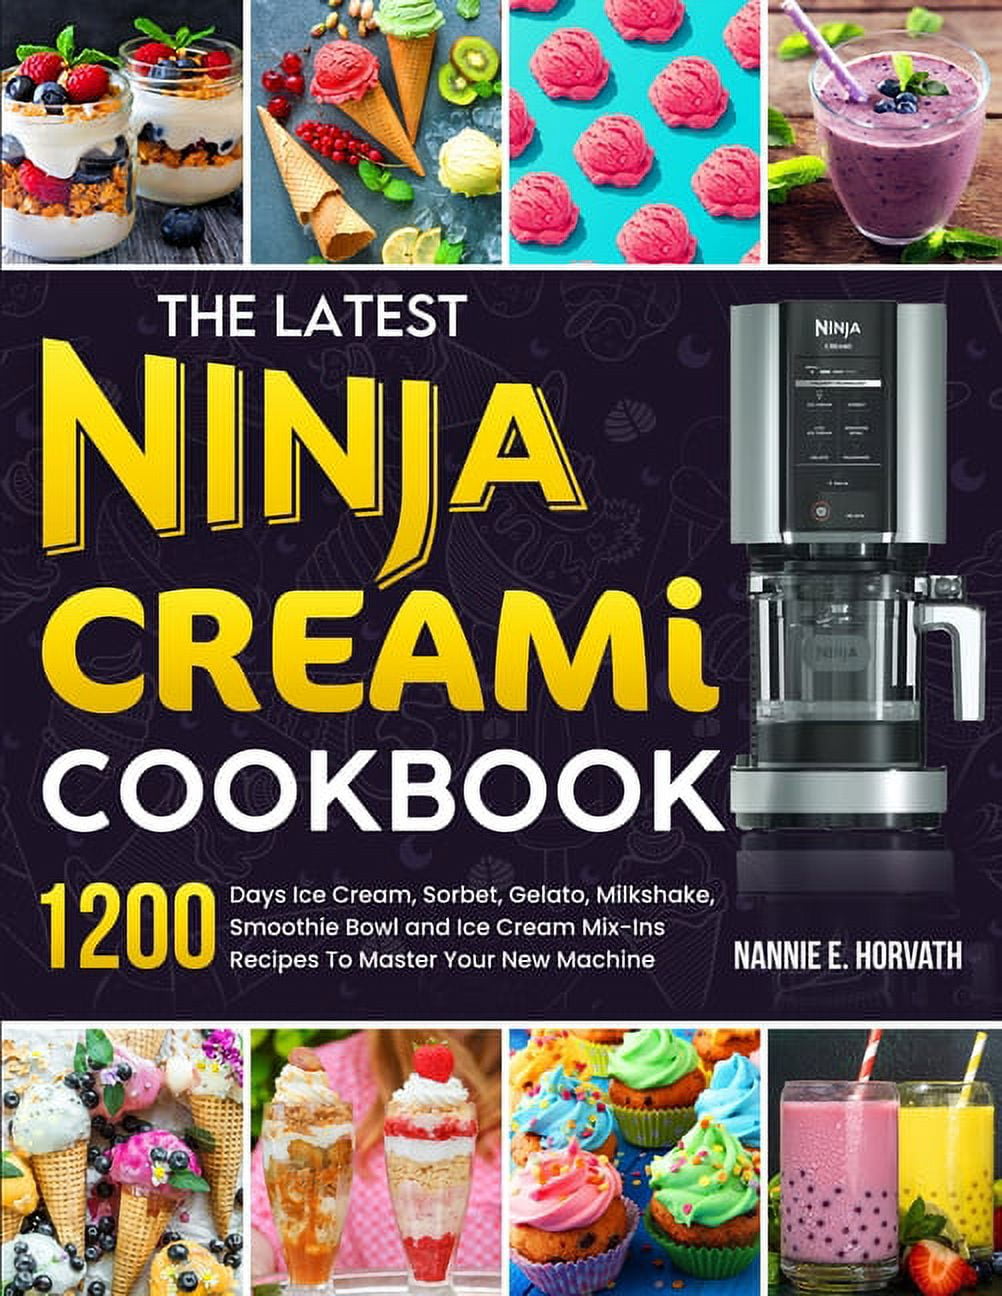 The new Ninja Creami Deluxe has released and you bet we're going